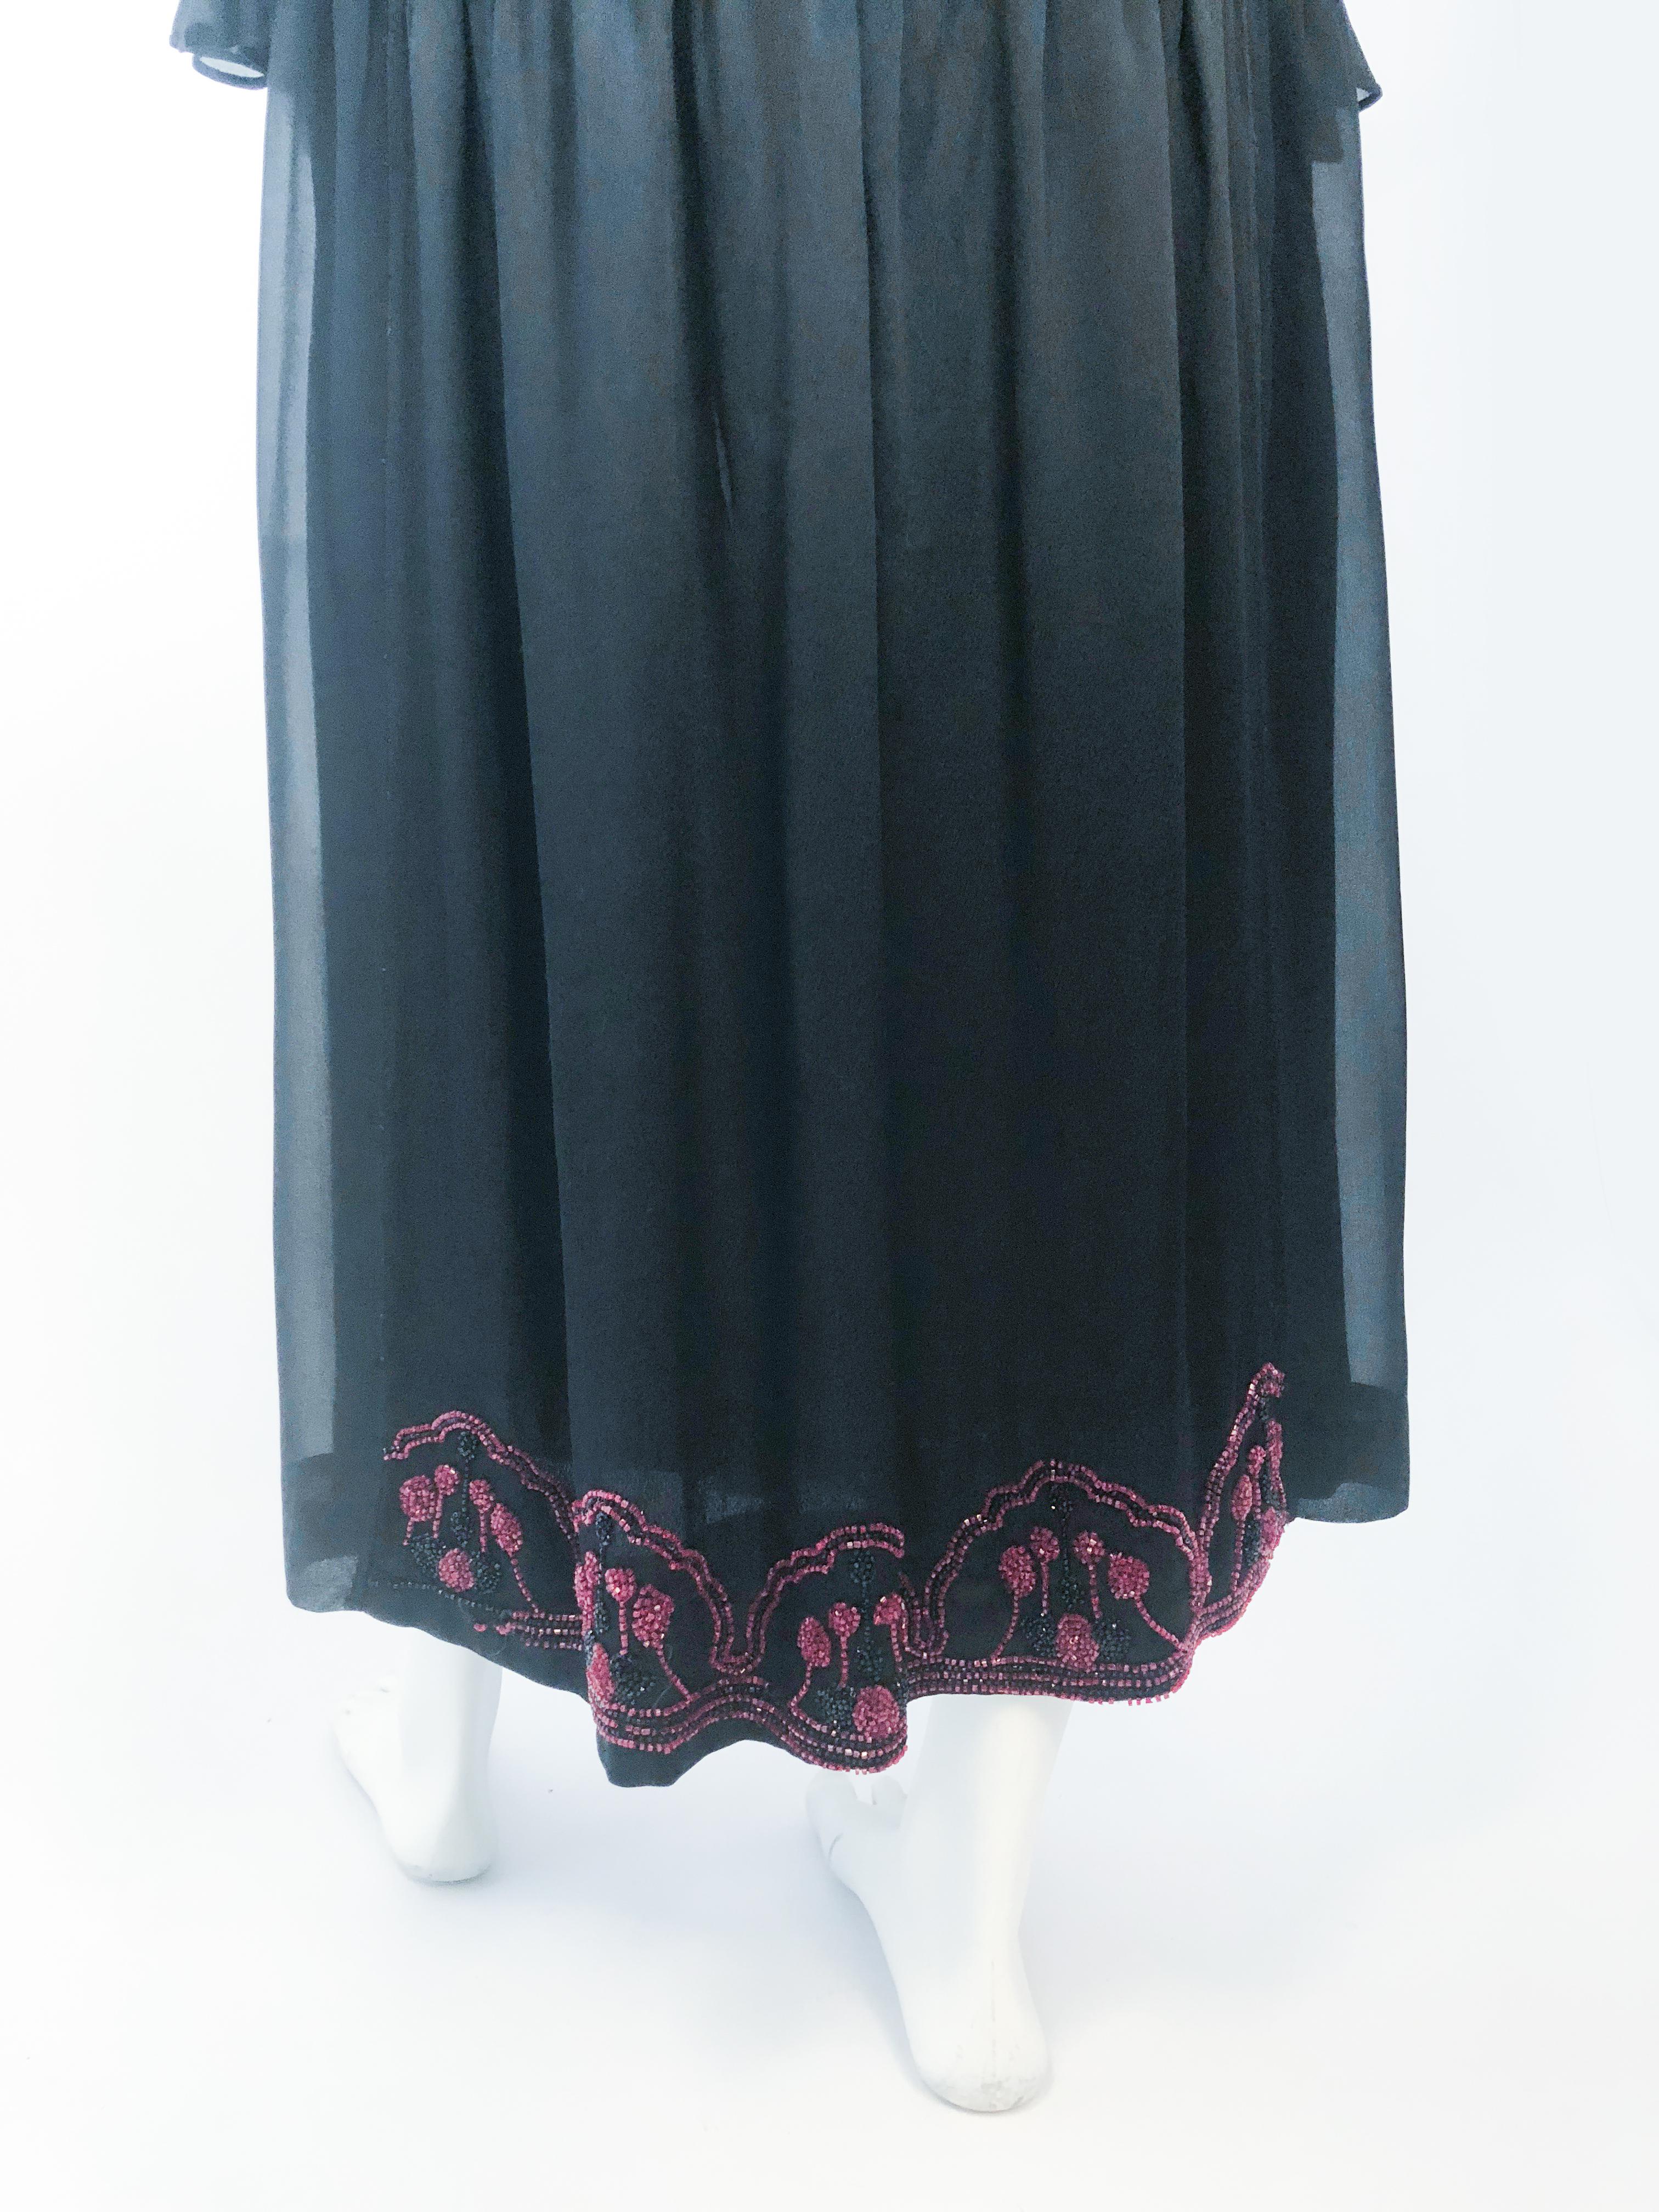 1920s Black Silk Chiffon Dress and Vest with Hand Beading Detail For Sale 4